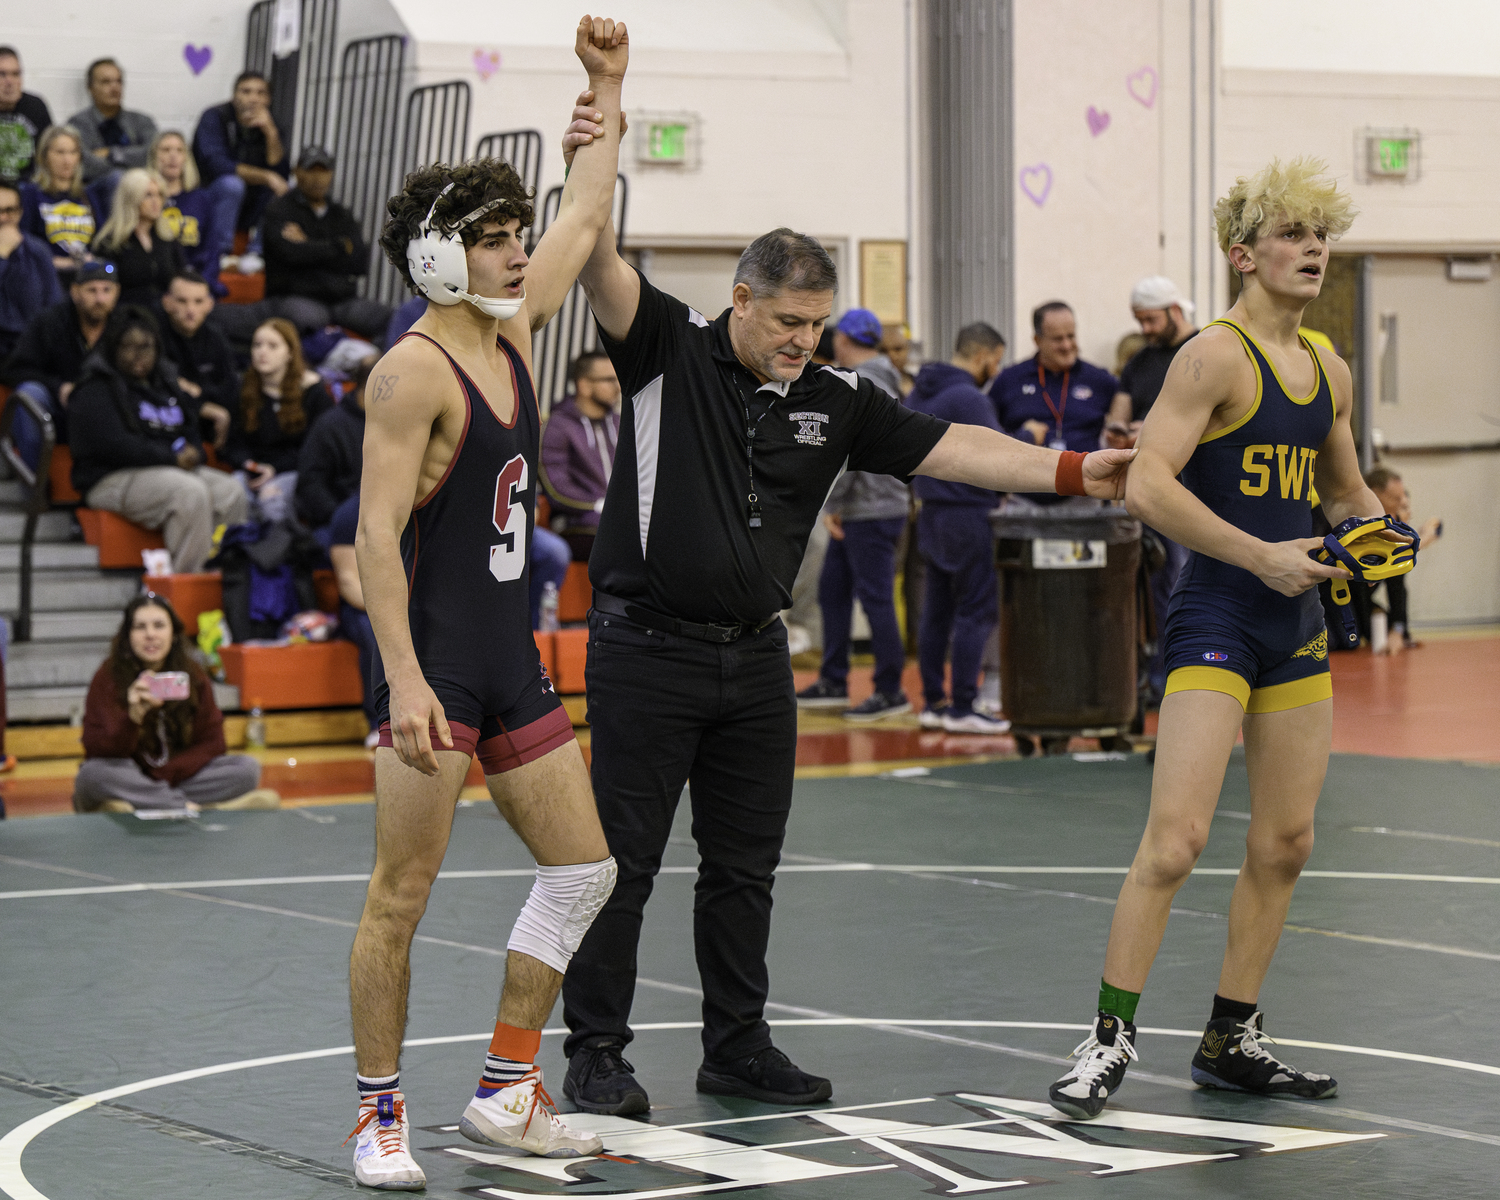 Jack Nastri gets his arm raised after defeating Shoreham-Wading River's Jacob Conti in the semifinals to place third.   MARIANNE BARNETT